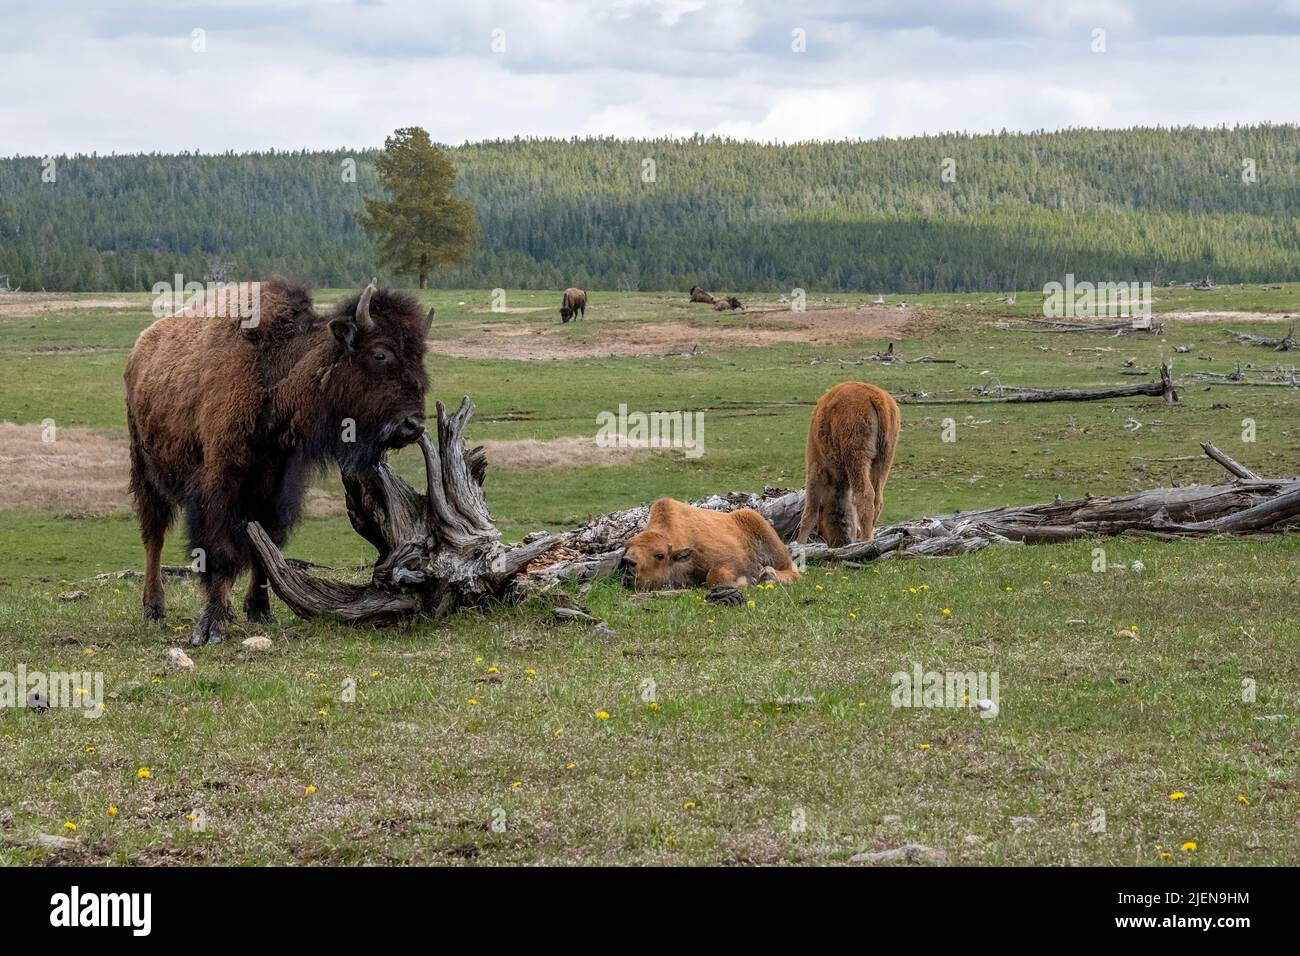 American Bison with Two Calves in Yellowstone National Park Stock Photo